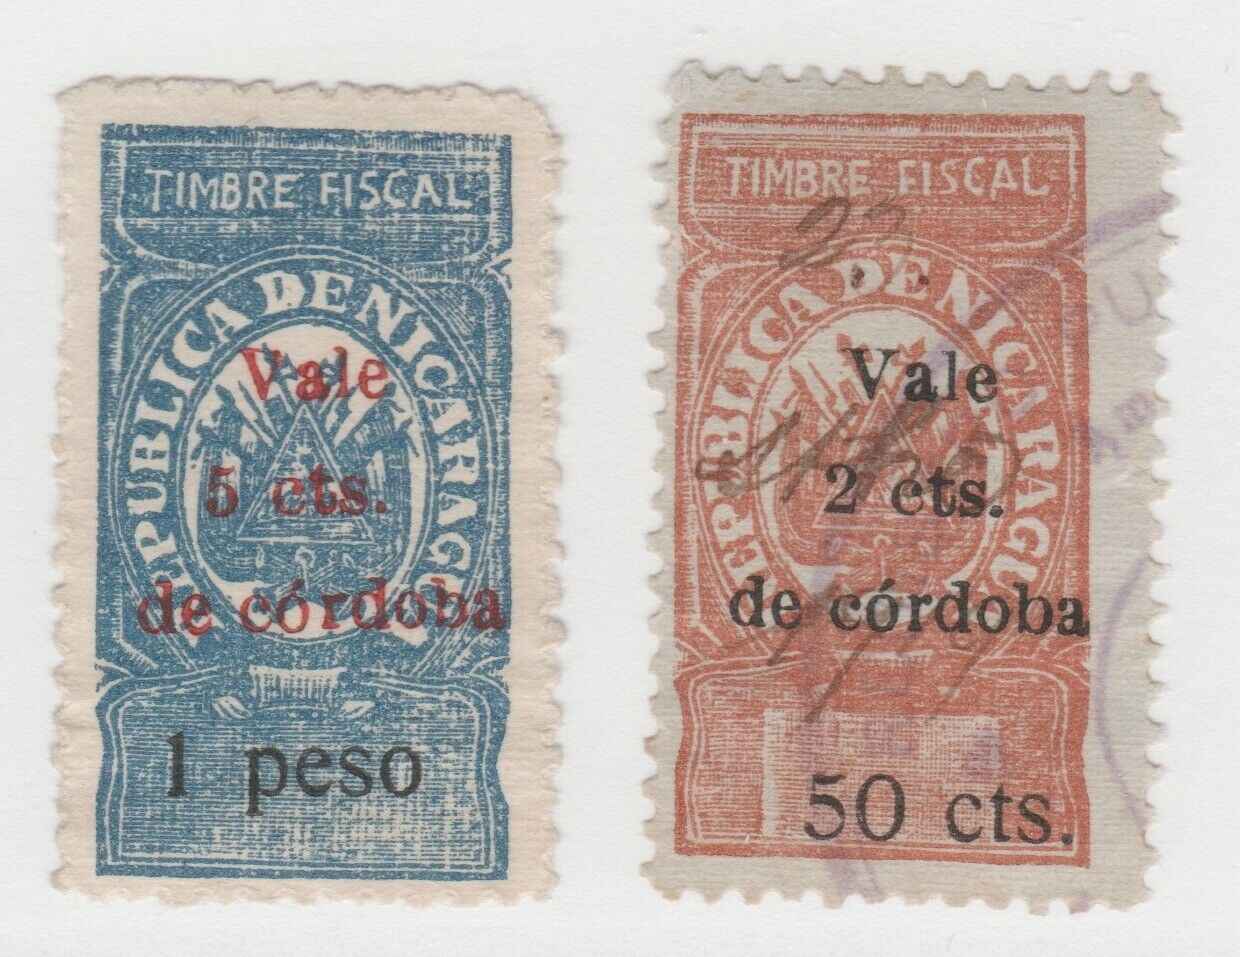 Nicaragua Revenue Fiscal Stamps 6-24-21-